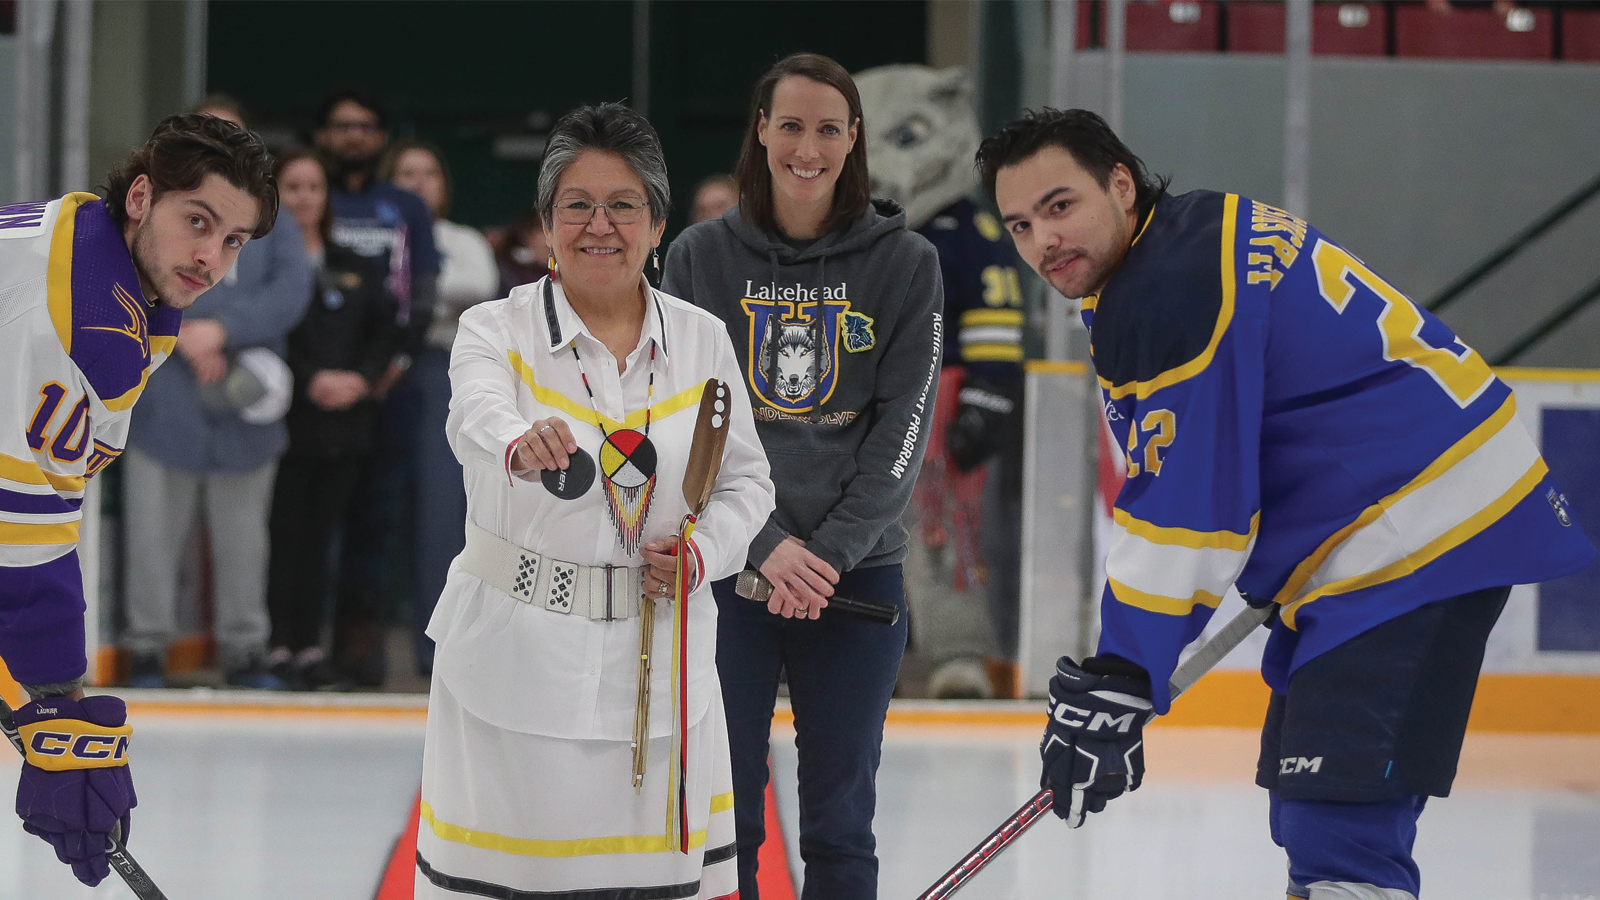 Lakehead's Amanda Stefanile standing in the background of the ceremonial puck drop at a Lakehead hockey game